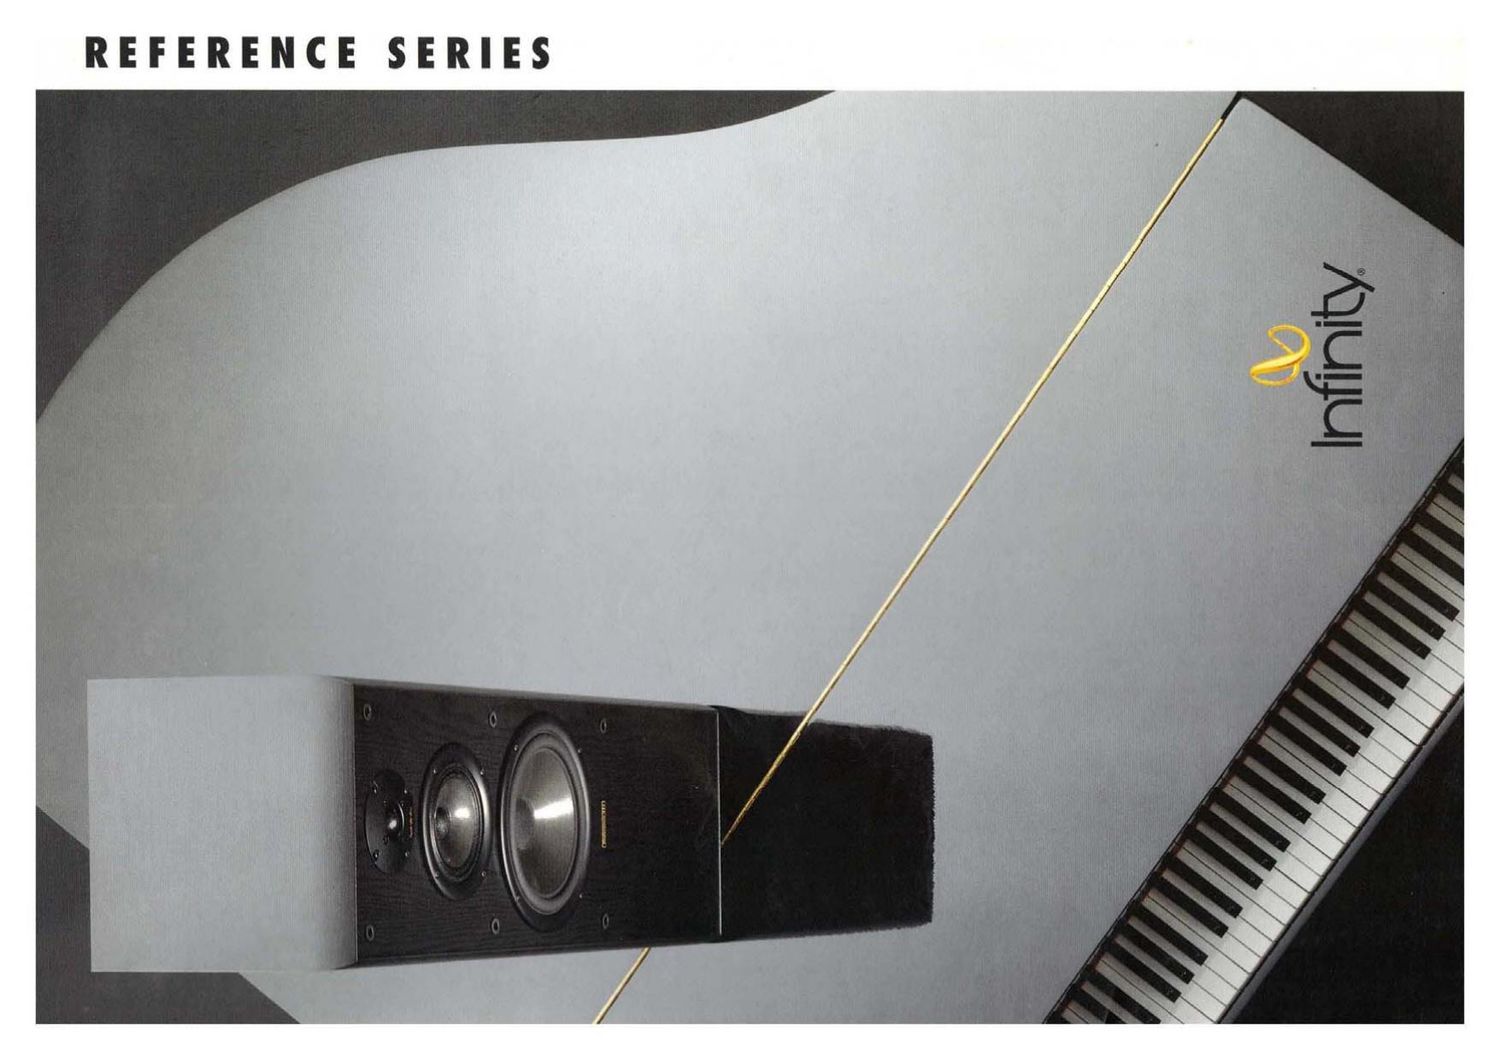 Infinity Reference Series 1996 French Catalog